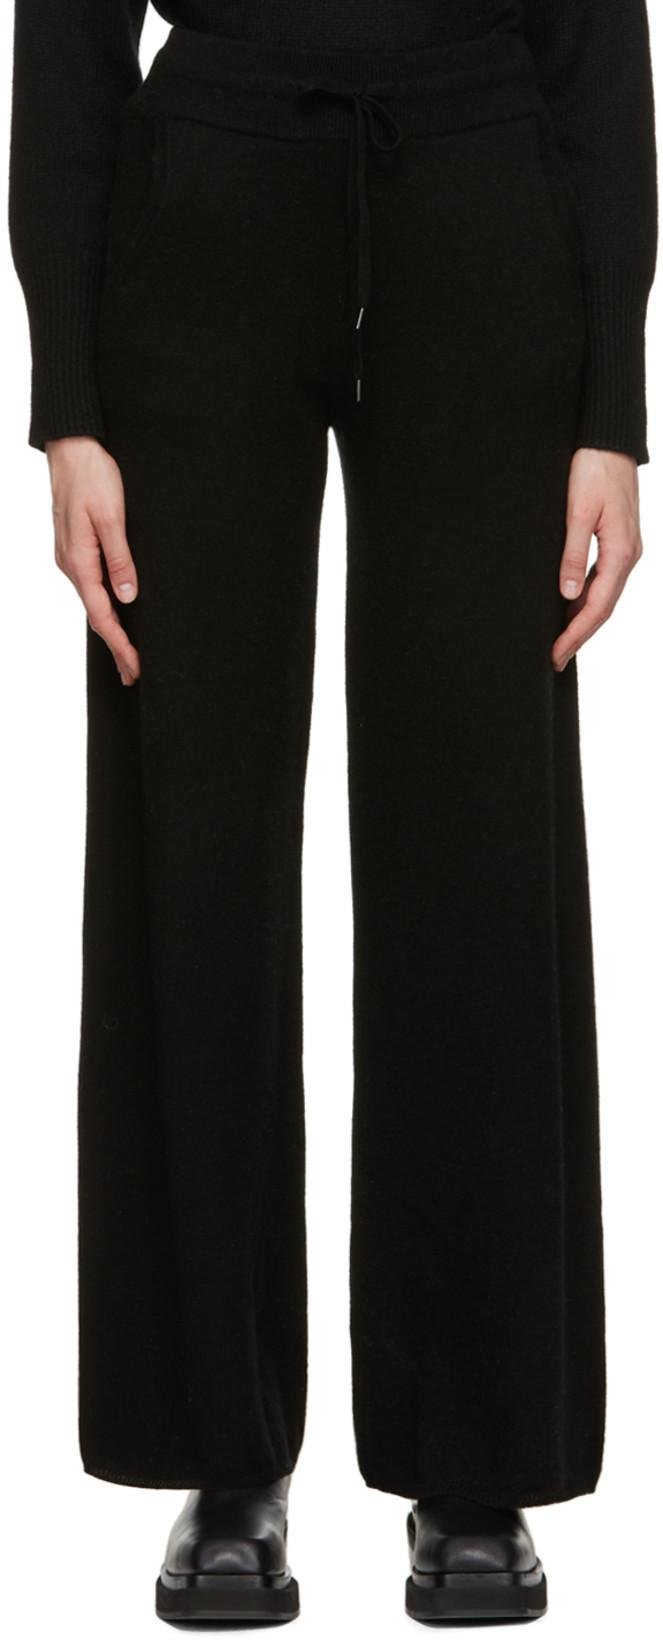 Black Erica Lounge Pants by 360 CASHMERE